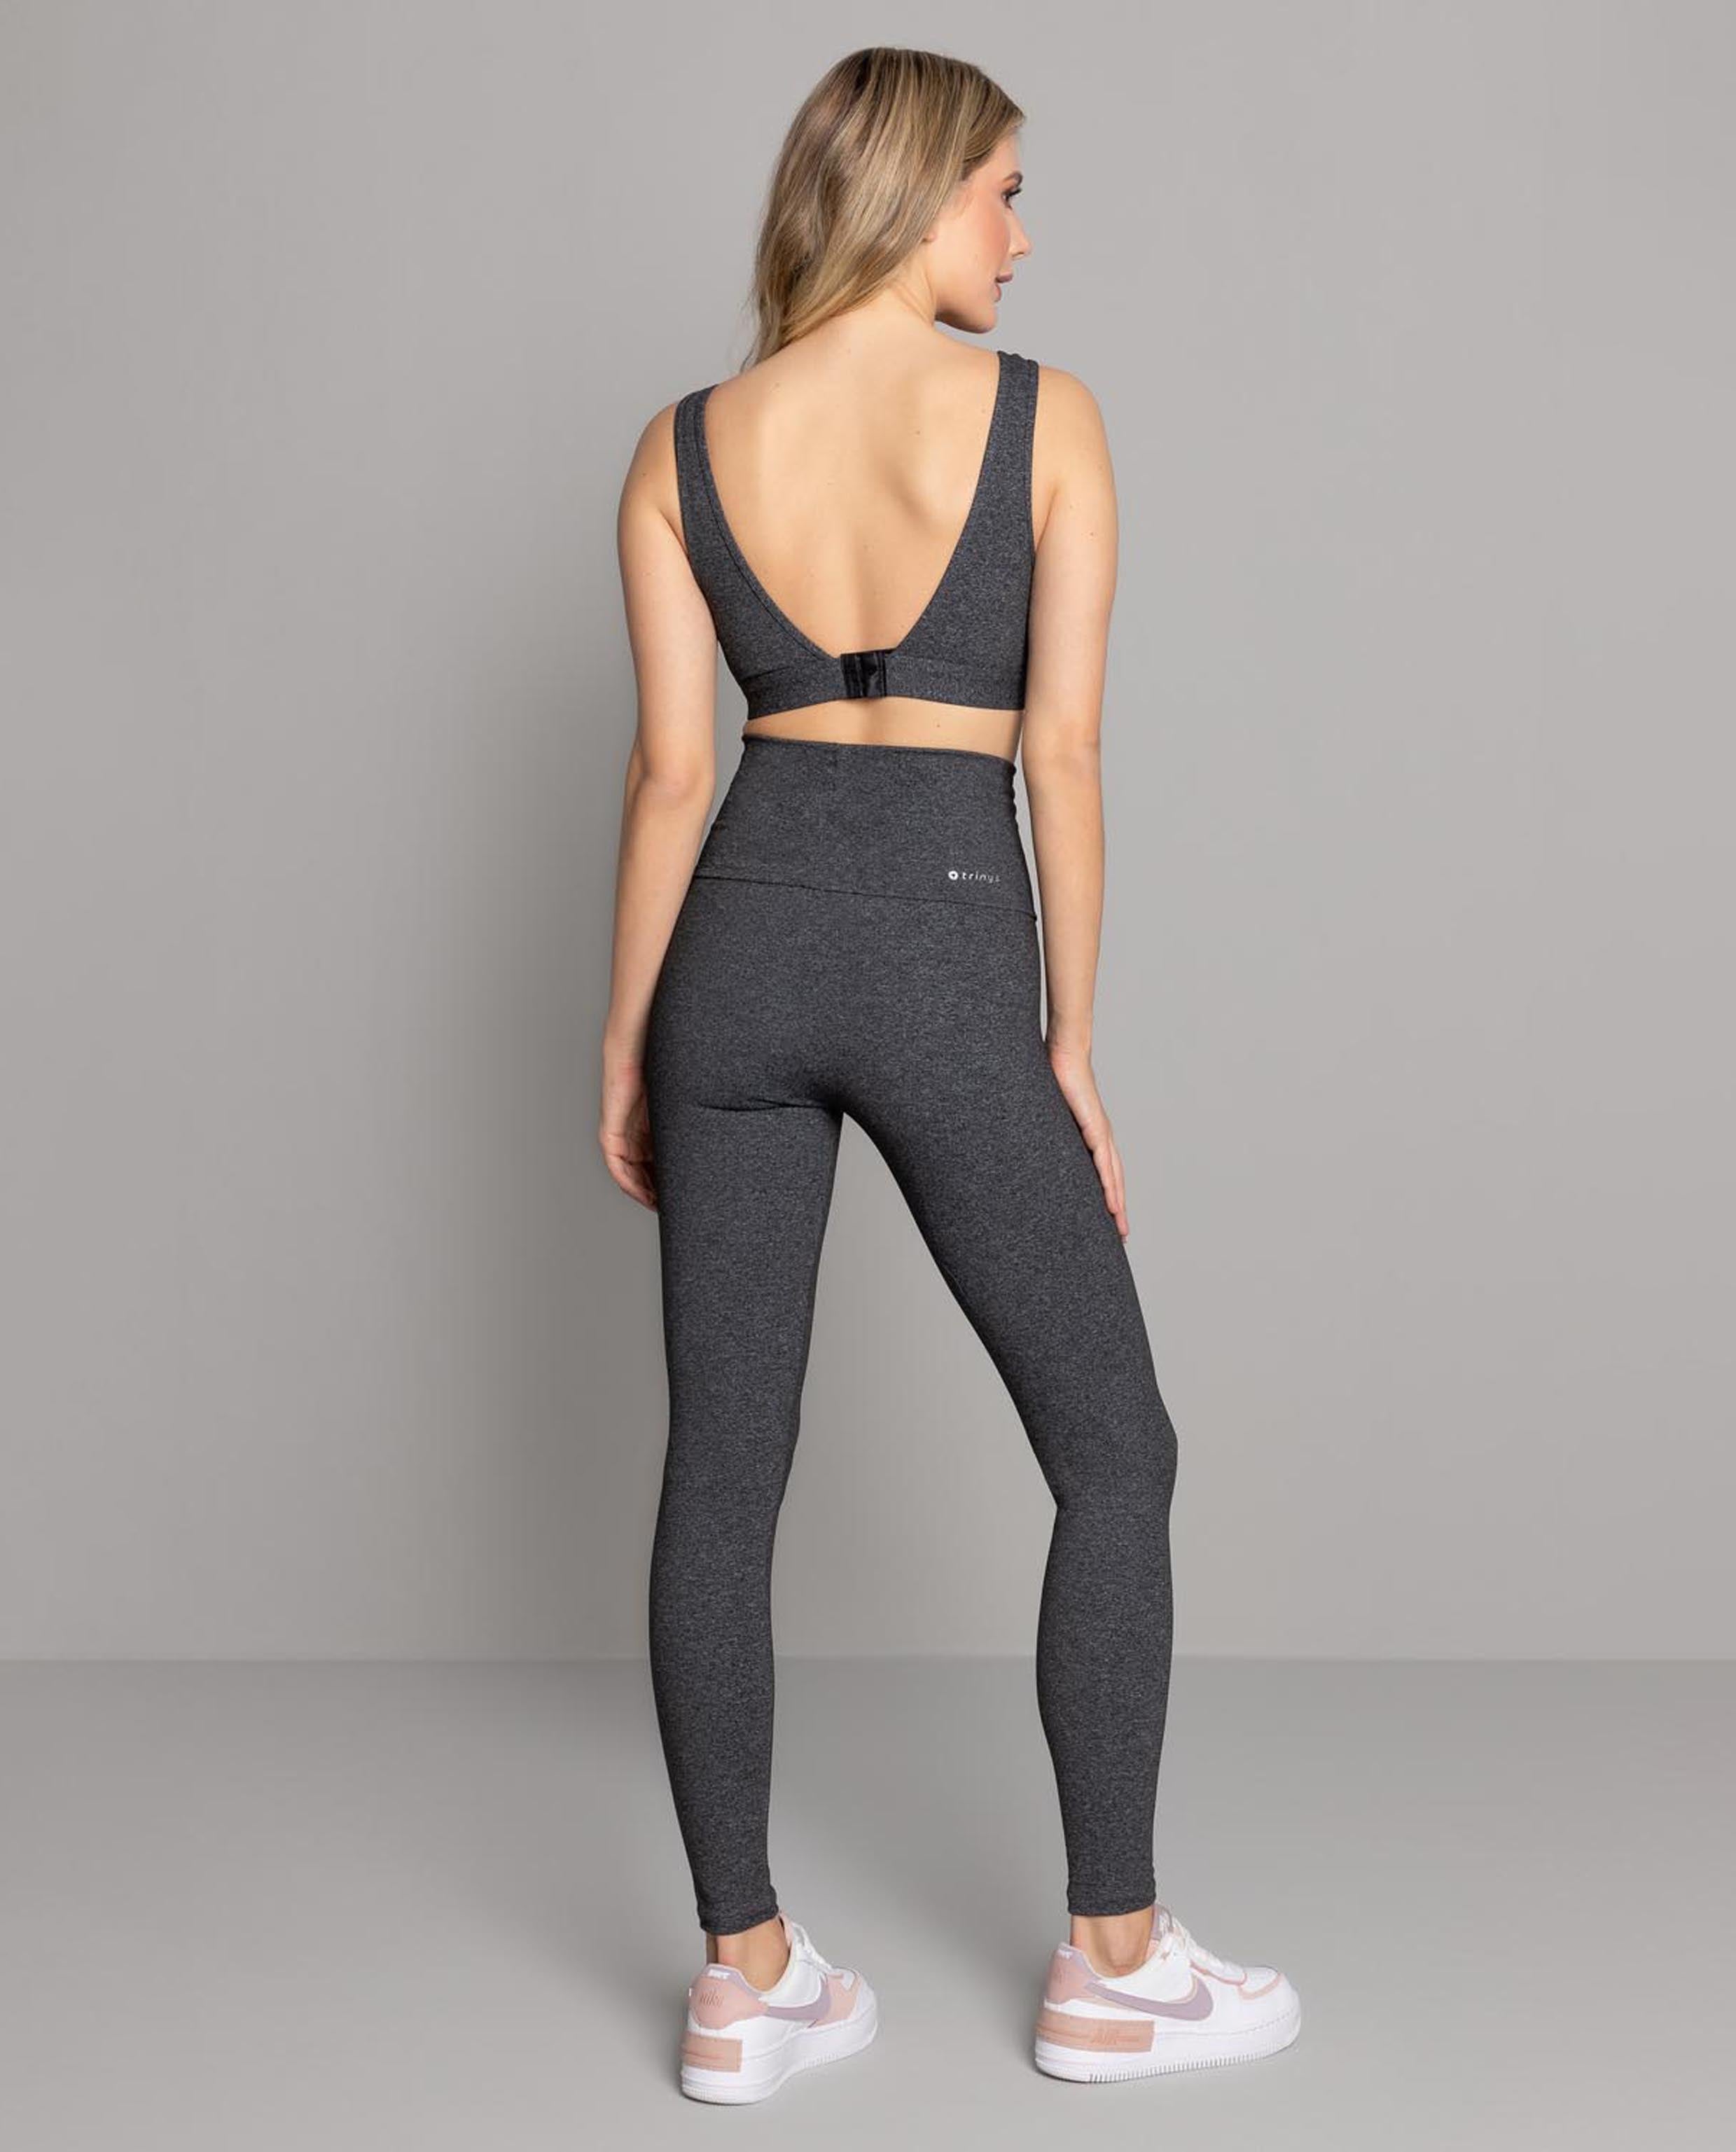 Women's Buttery Soft Activewear Leggings (Medium only) - Wholesale